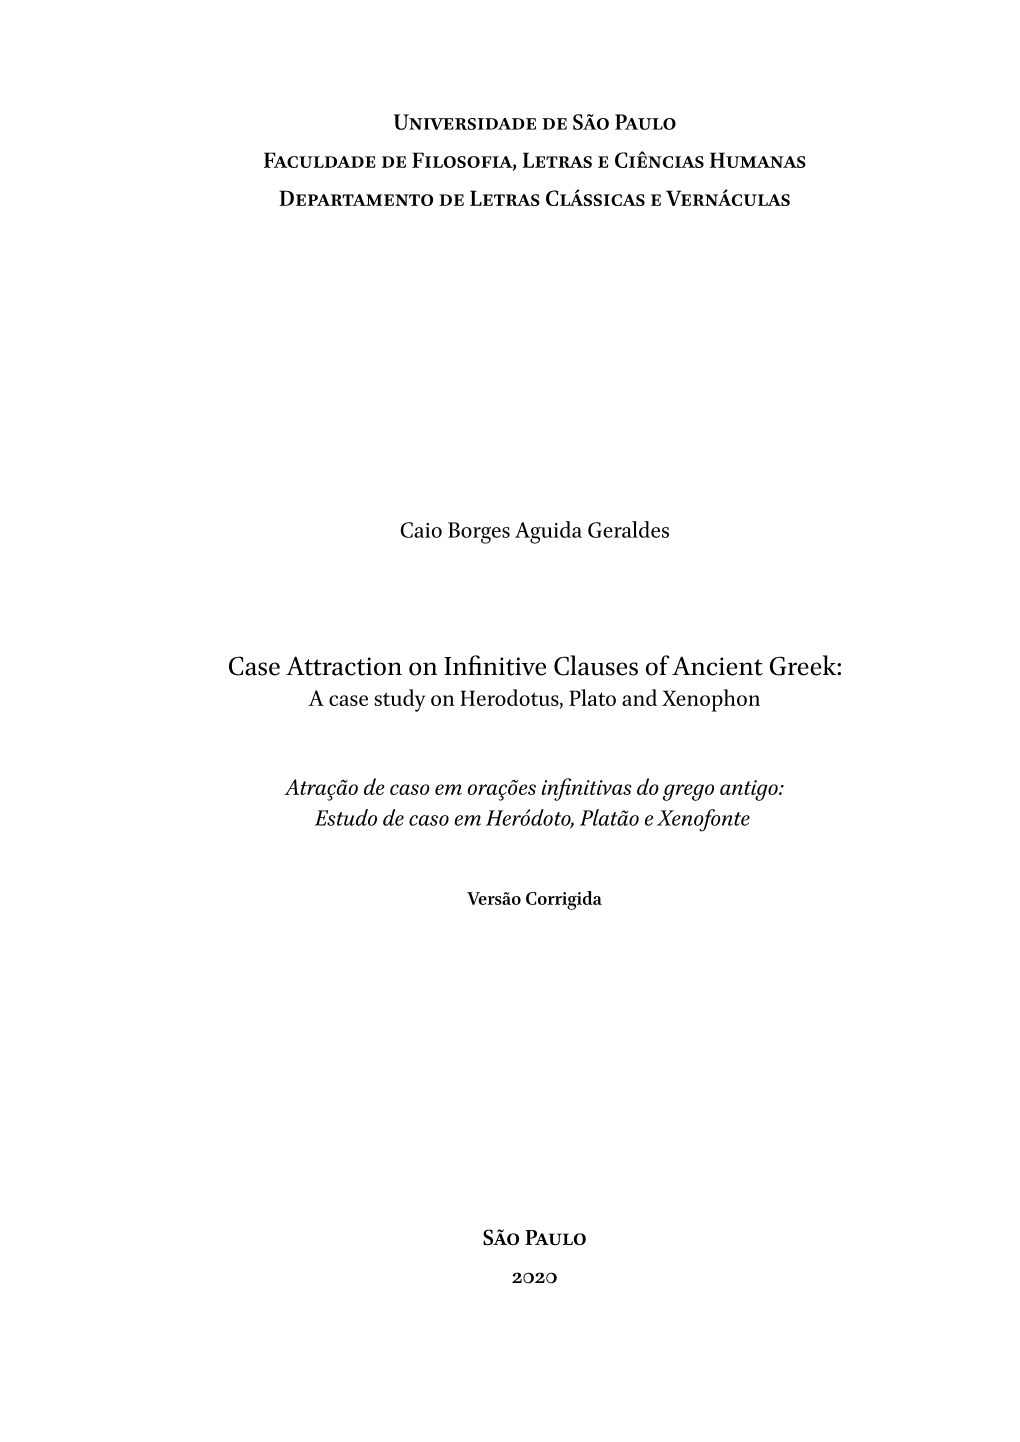 Case Attraction on Infinitive Clauses of Ancient Greek: a Case Study on Herodotus, Plato and Xenophon